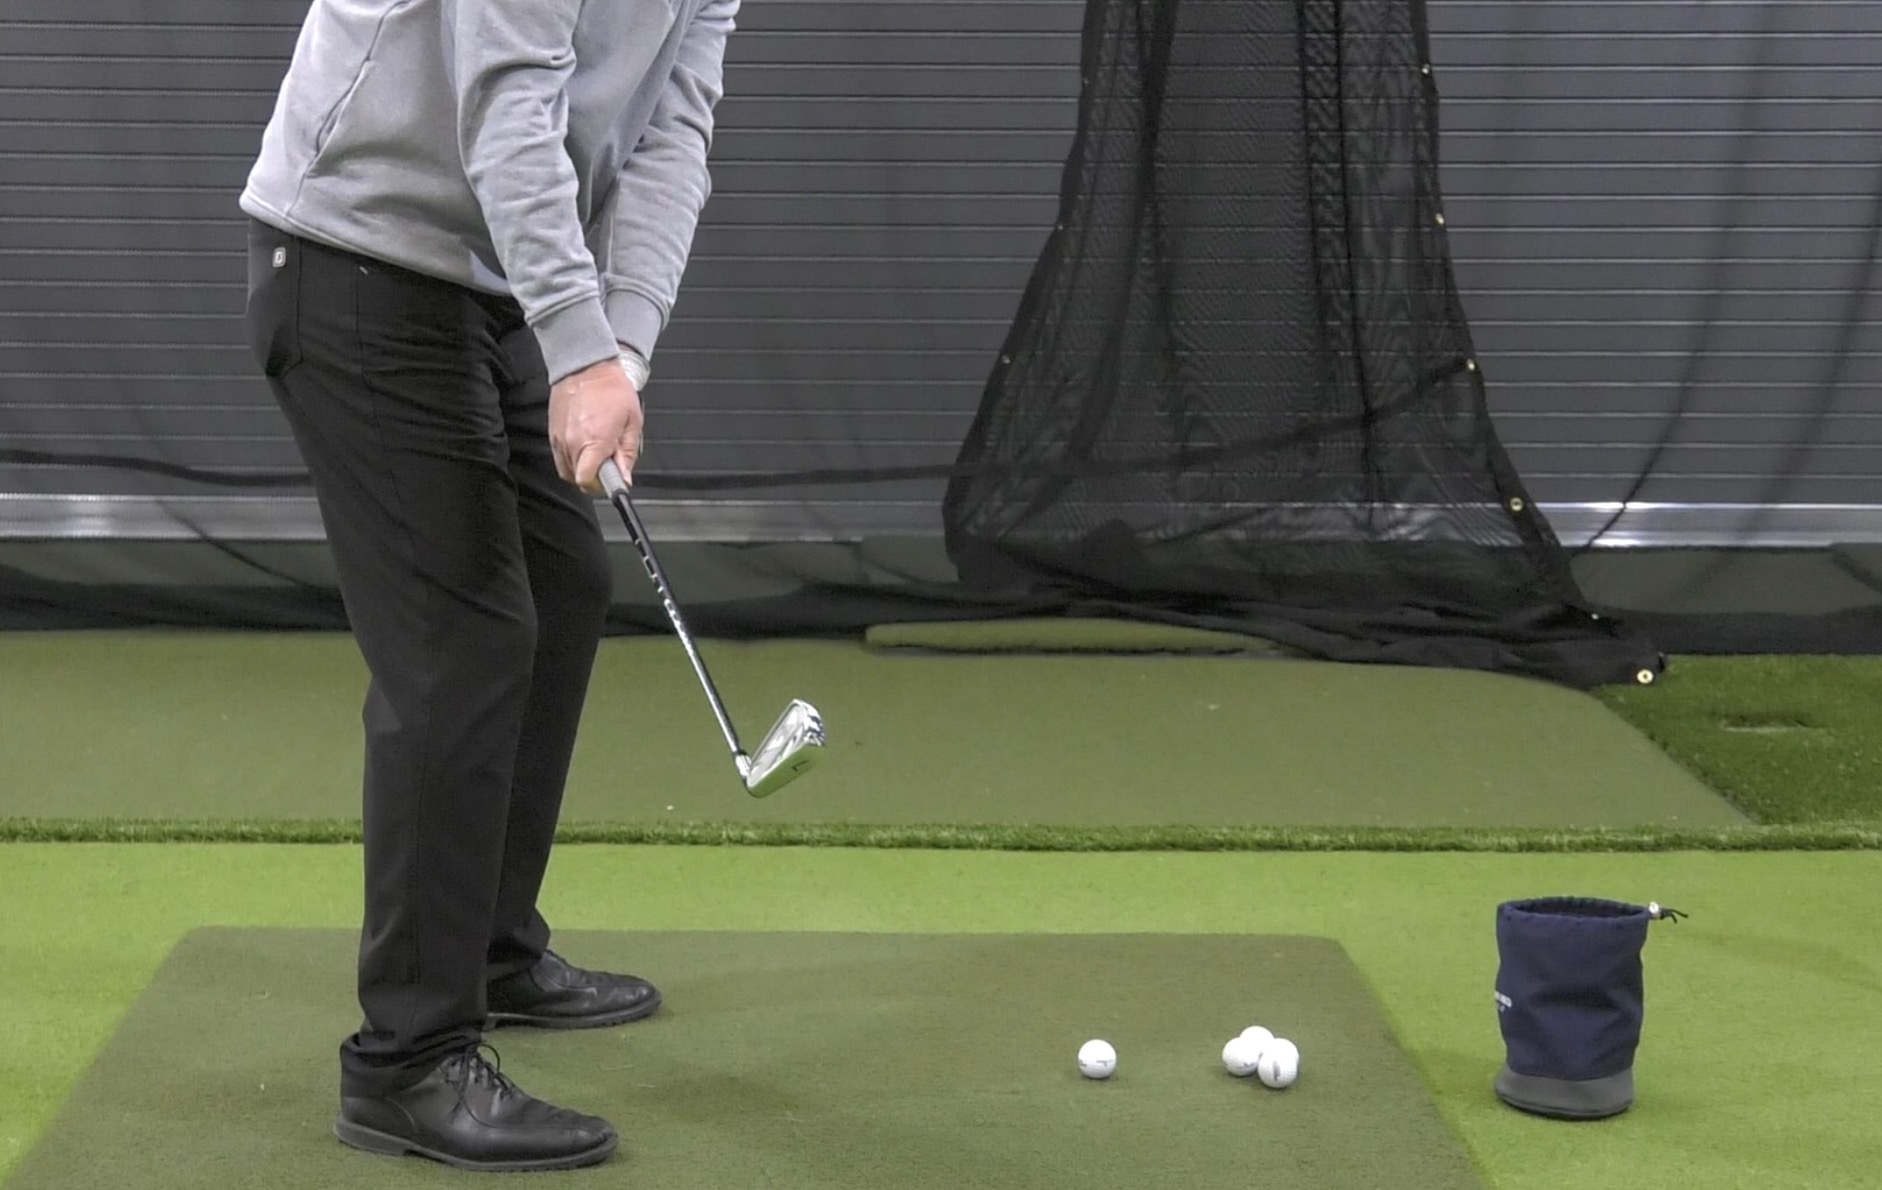 A golfer showing the wrist movement drill